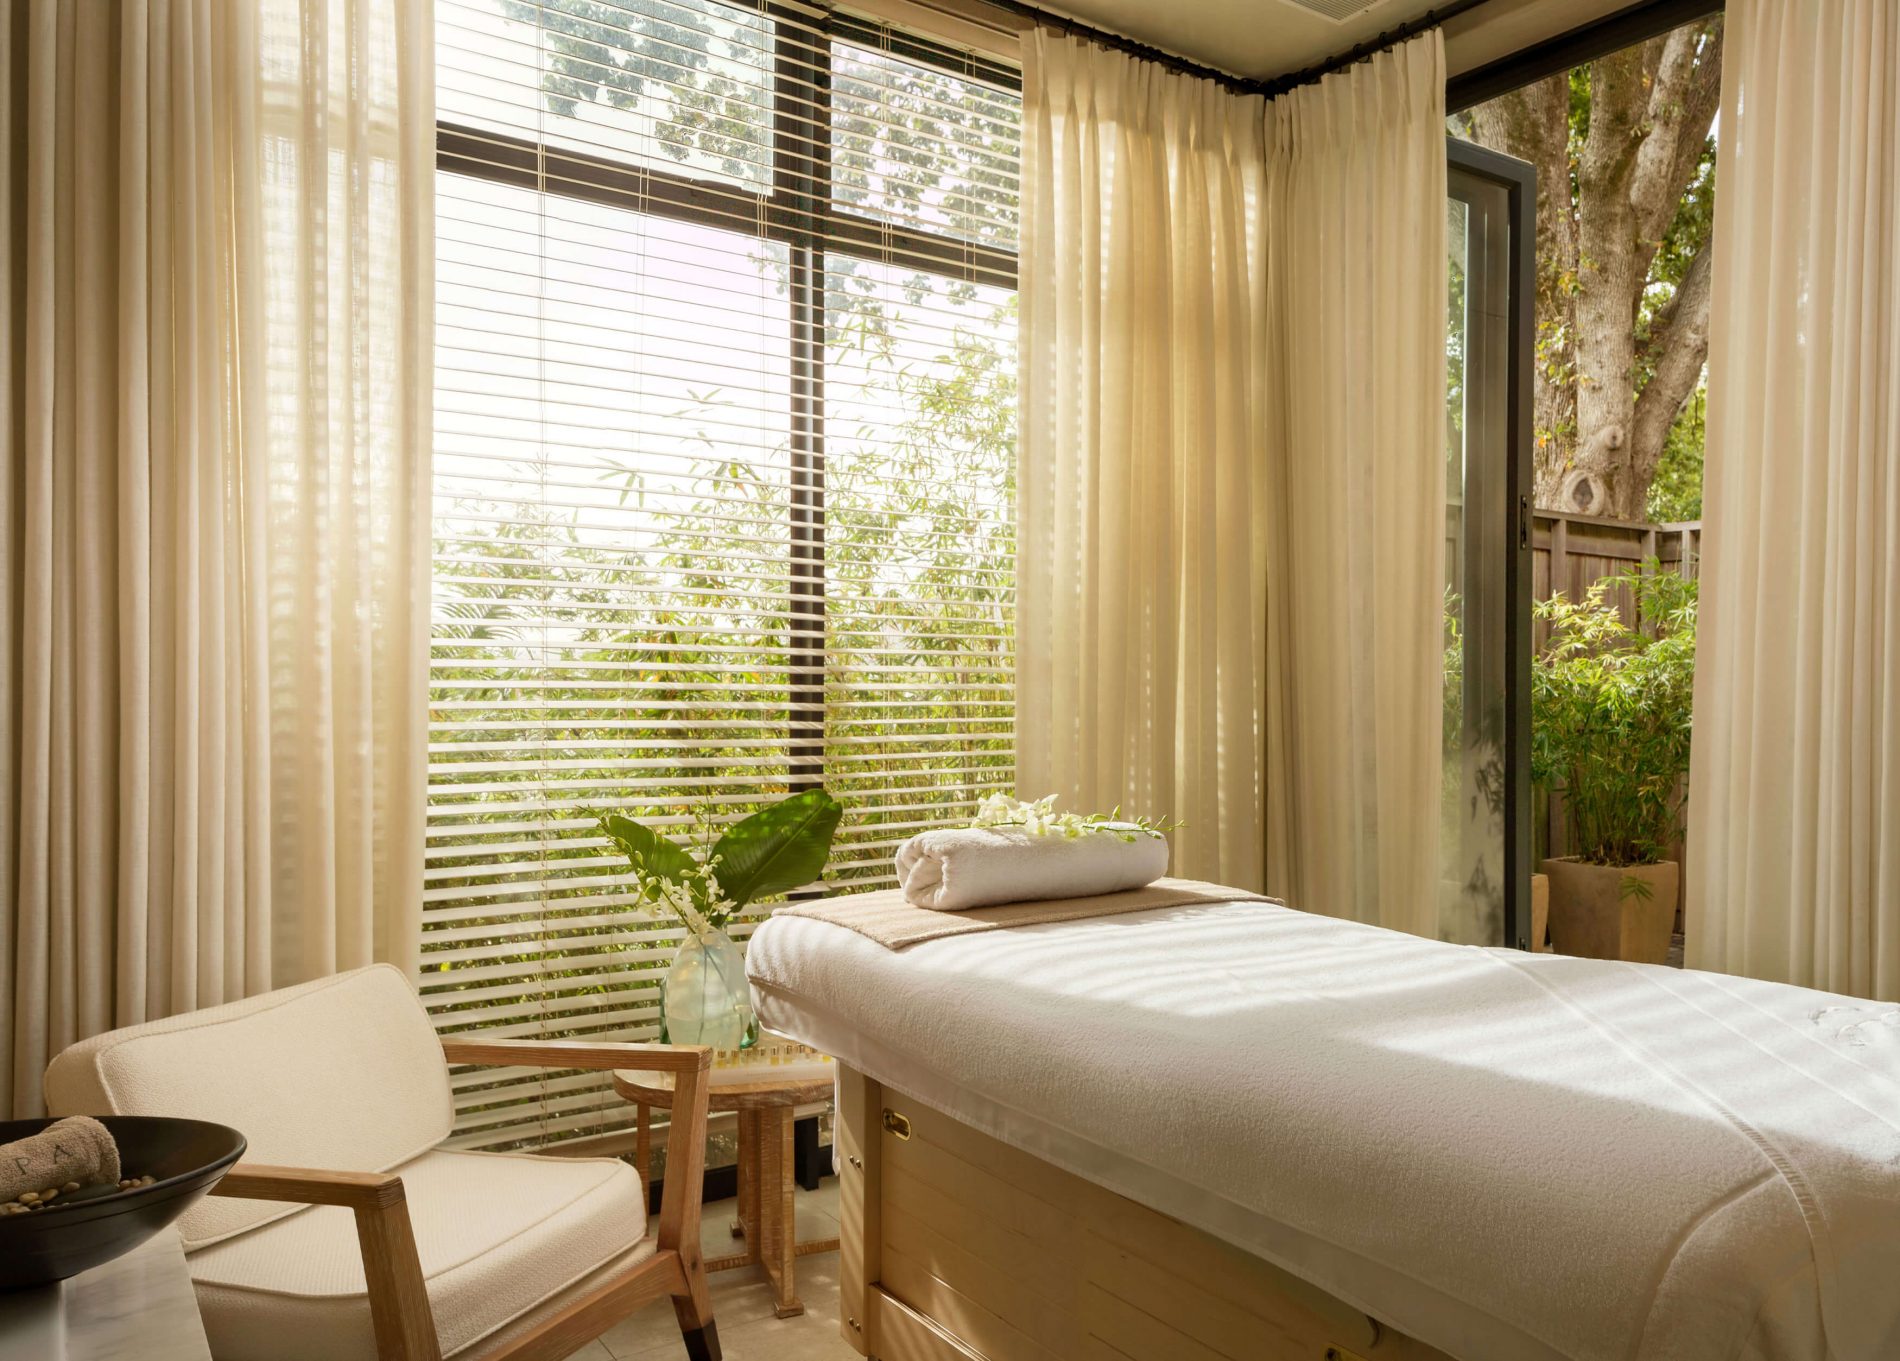 A Delaire Graff Spa treatment room overlooking gardens